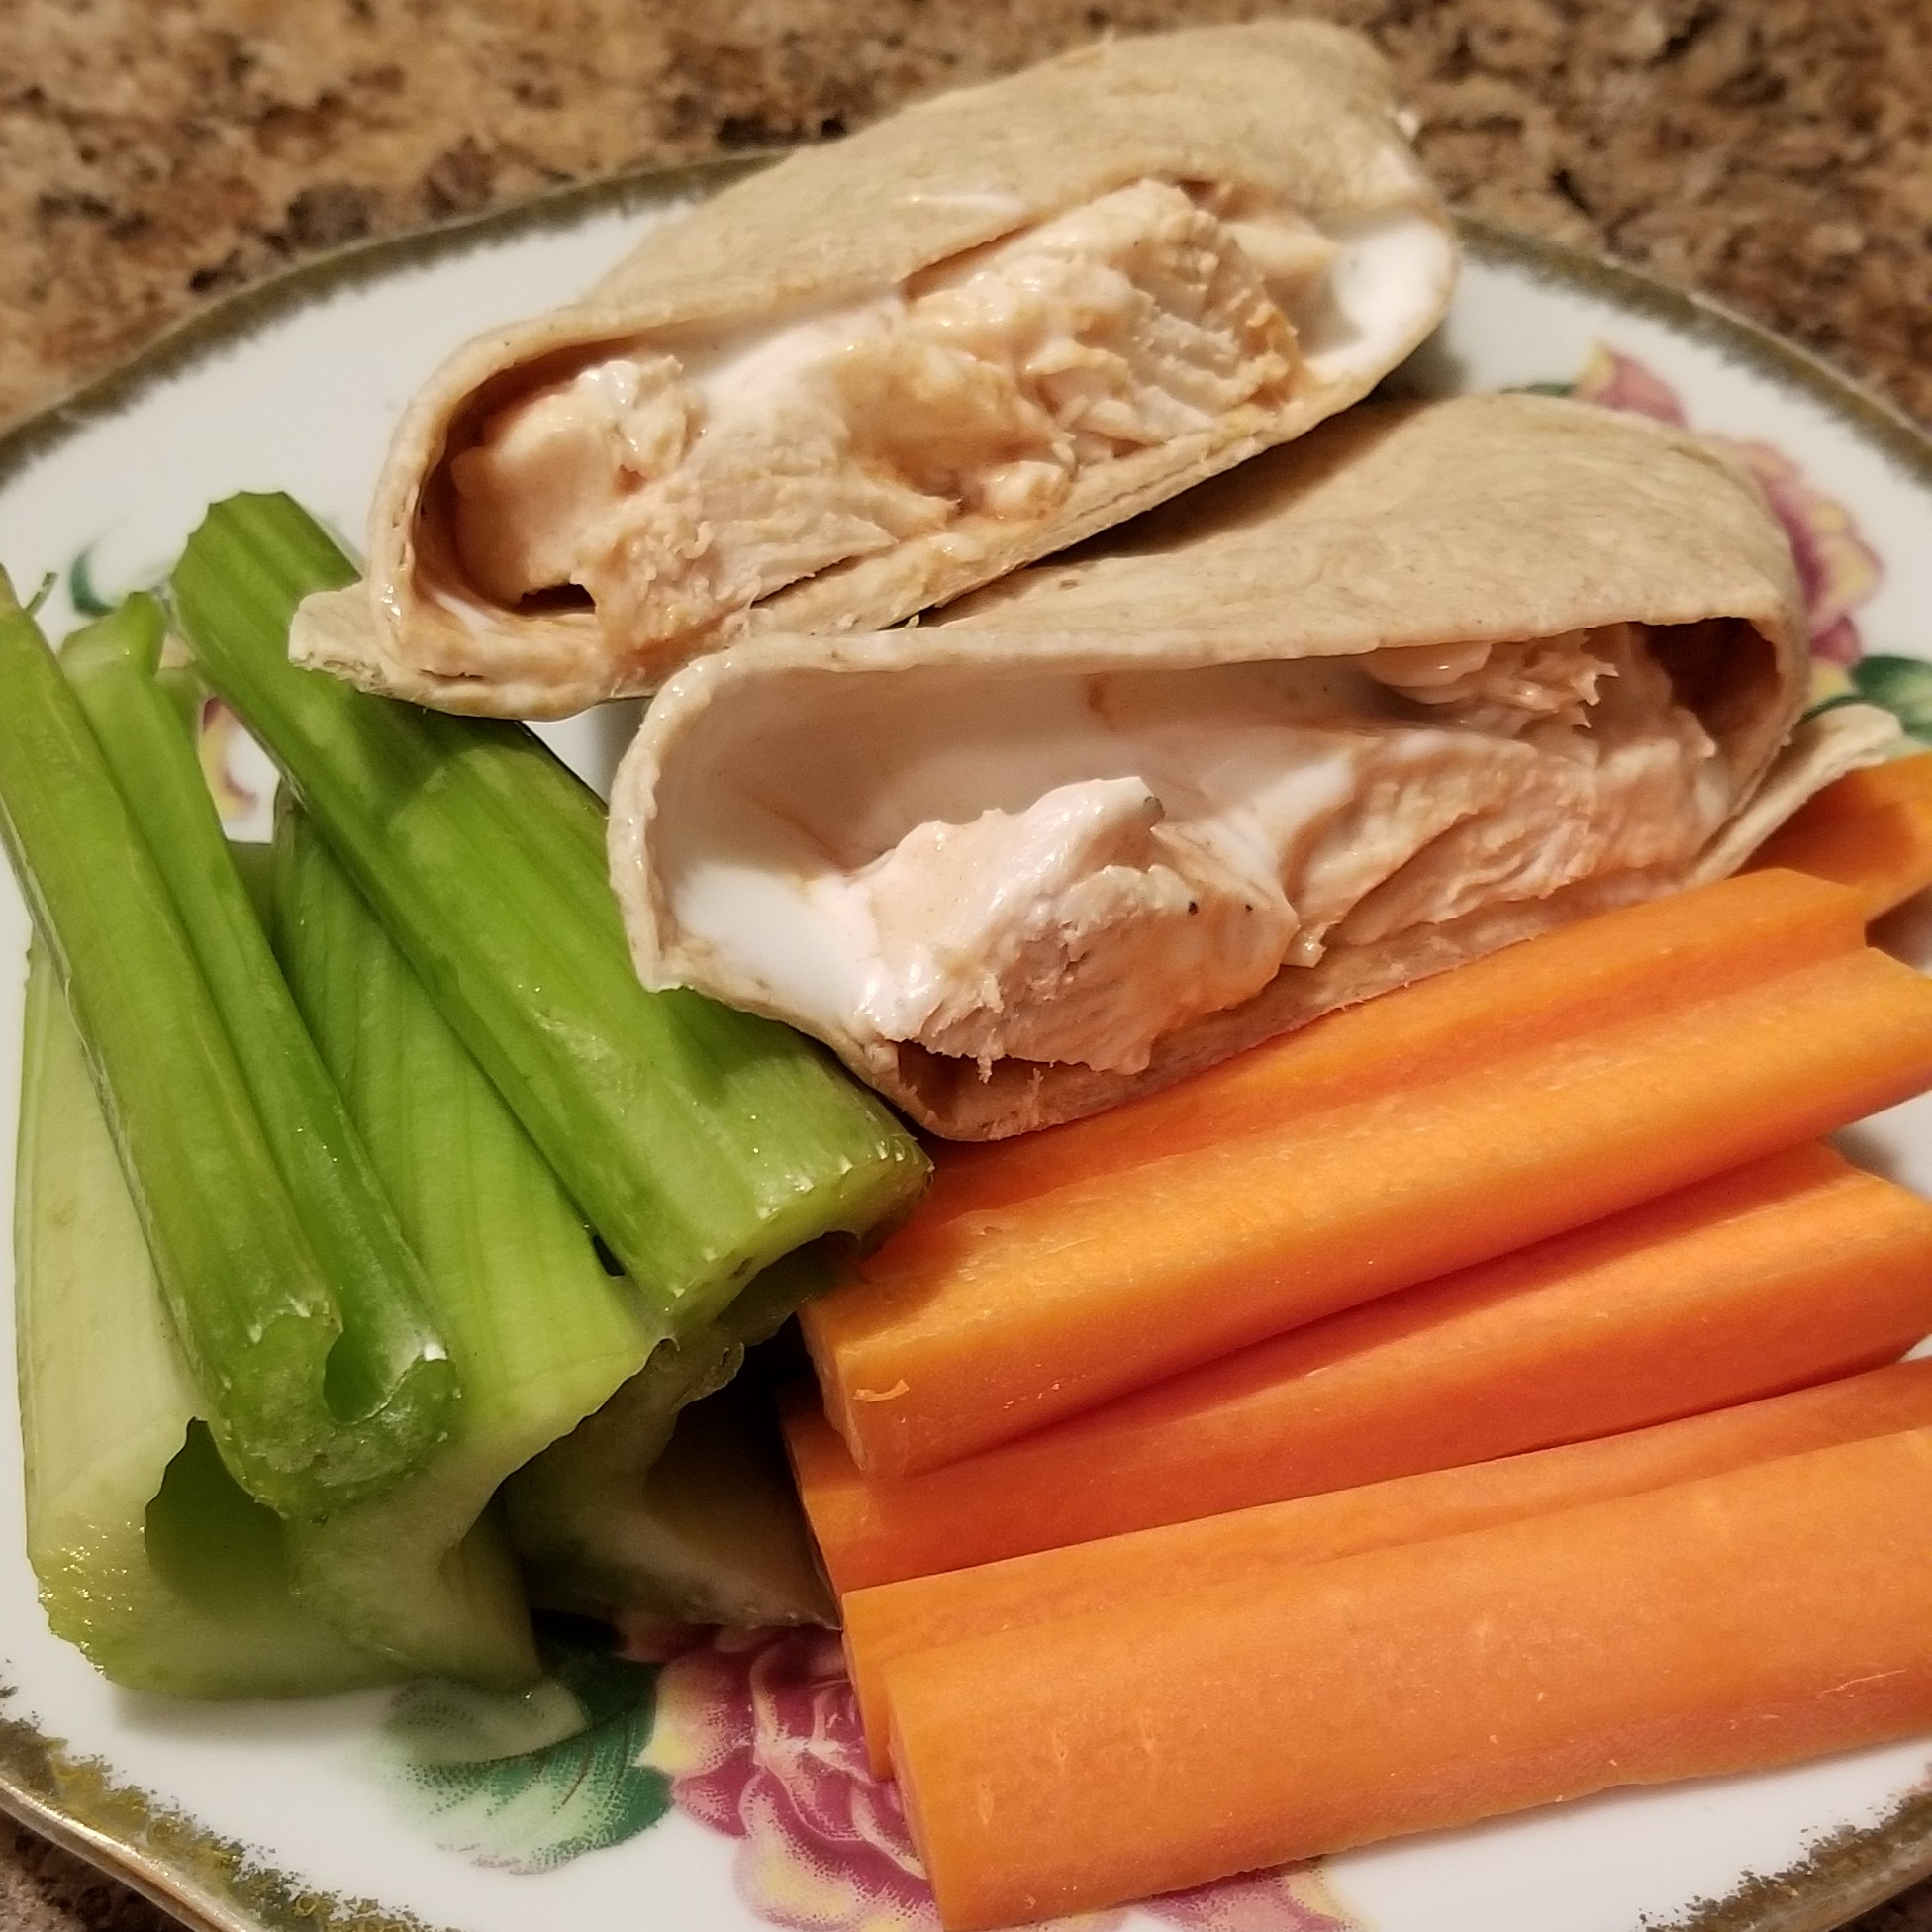 Buffalo Ranch Chicken Wraps with Carrots and Celery Sticks